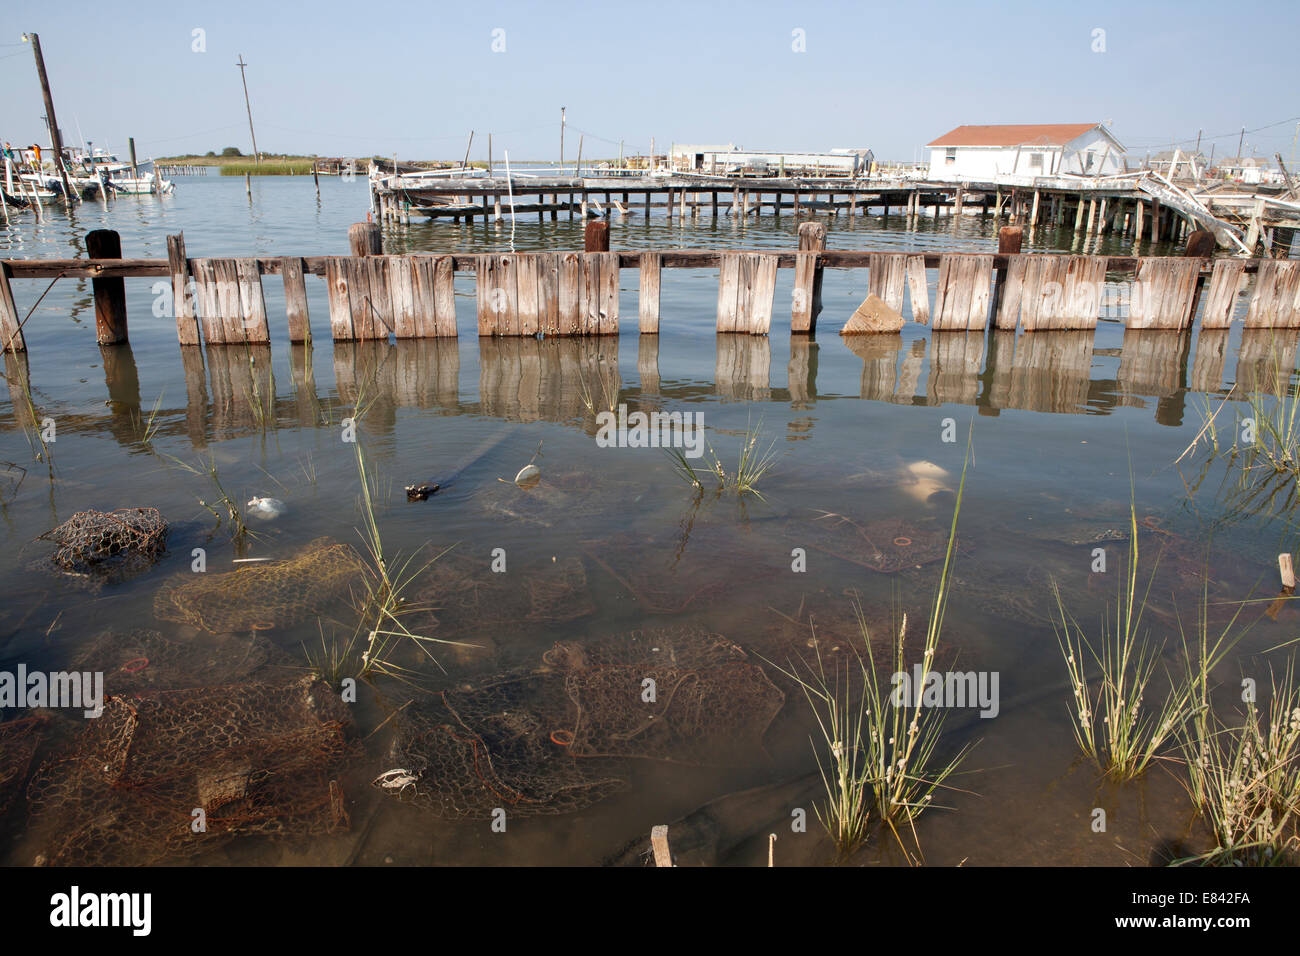 Wooden piers and discarded lobster pots in shallow water, Chesapeake Bay, Tangier Island Virginia, USA Stock Photo